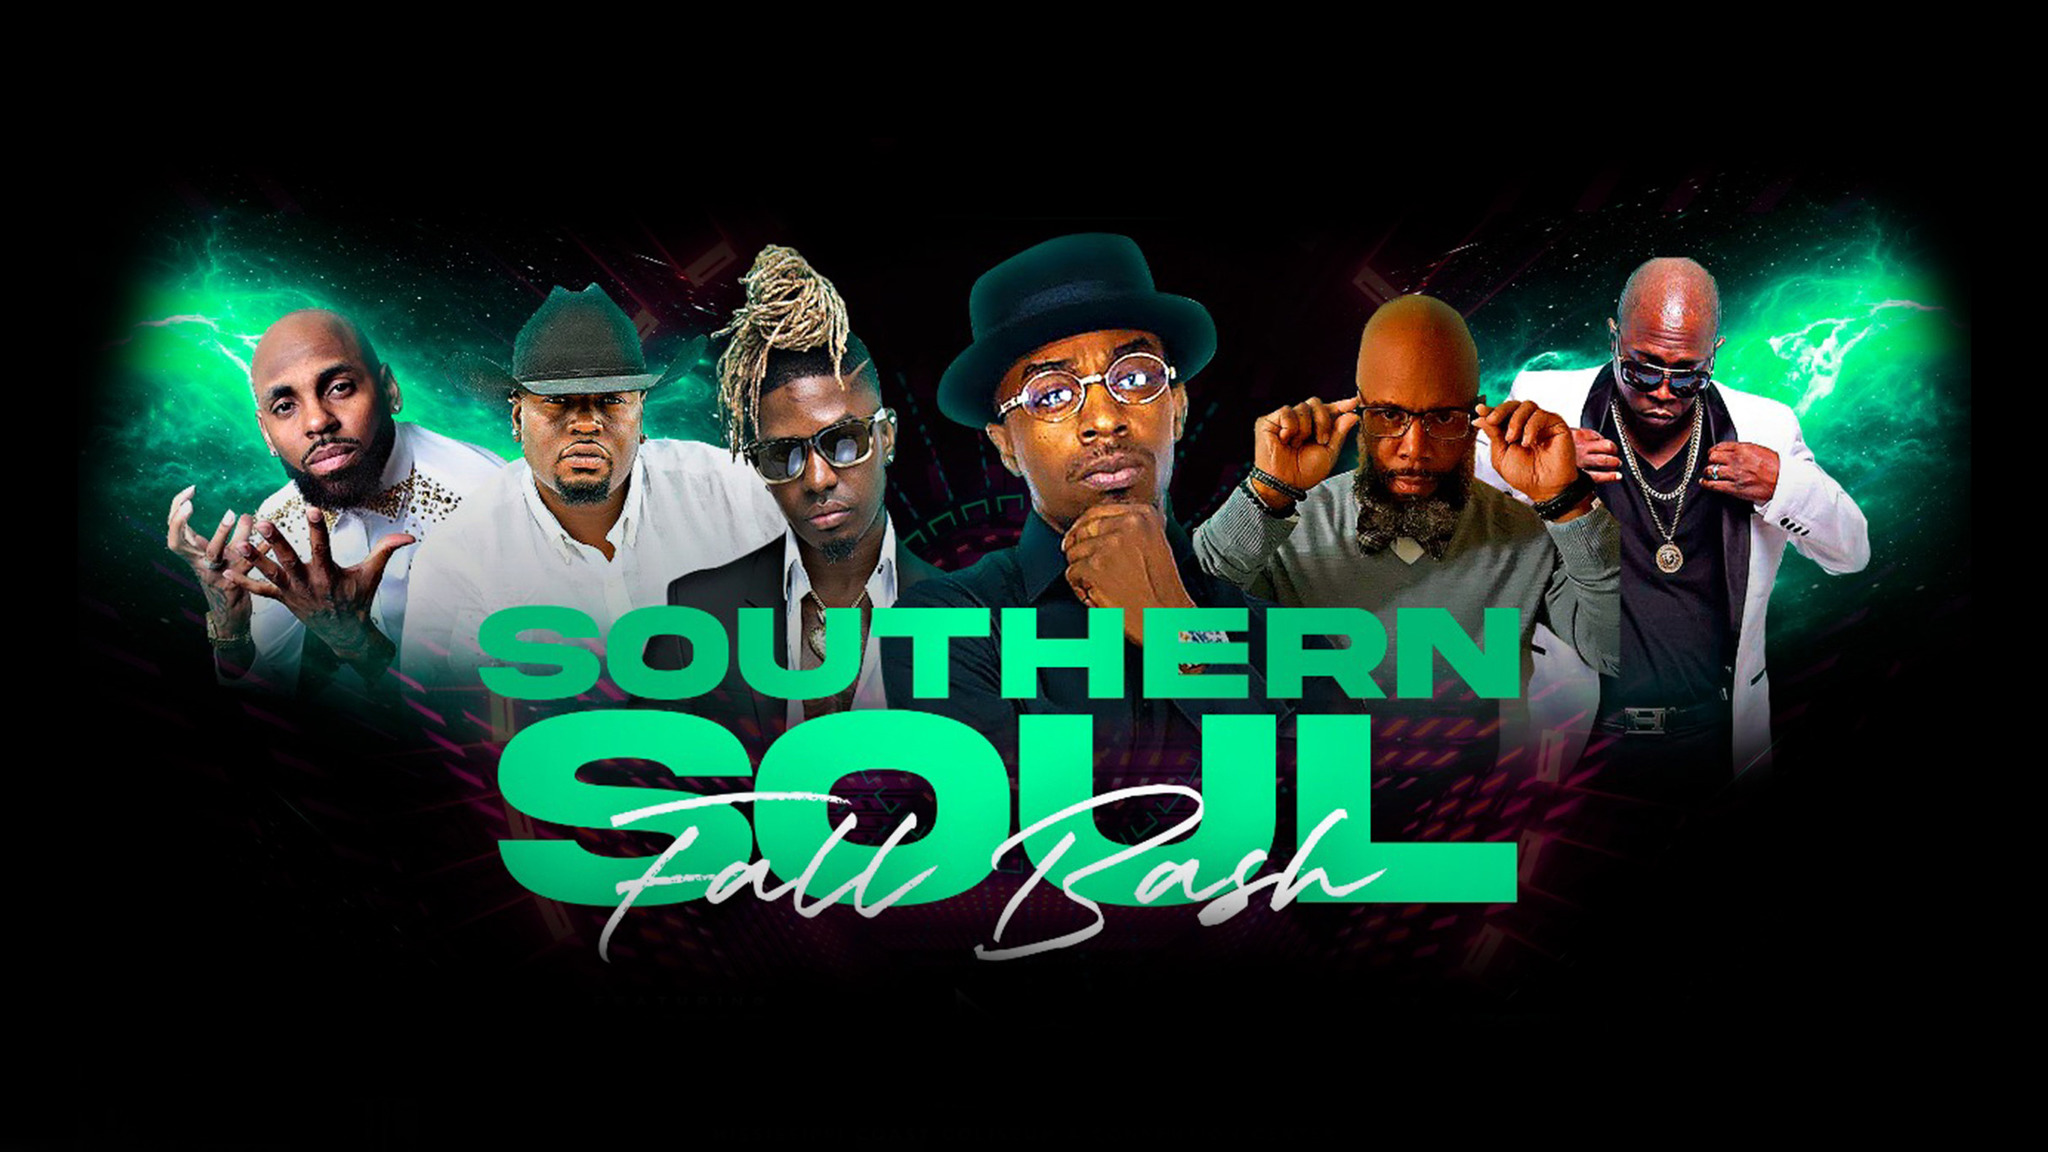 Southern Soul Fall Bash Tickets, 20222023 Concert Tour Dates